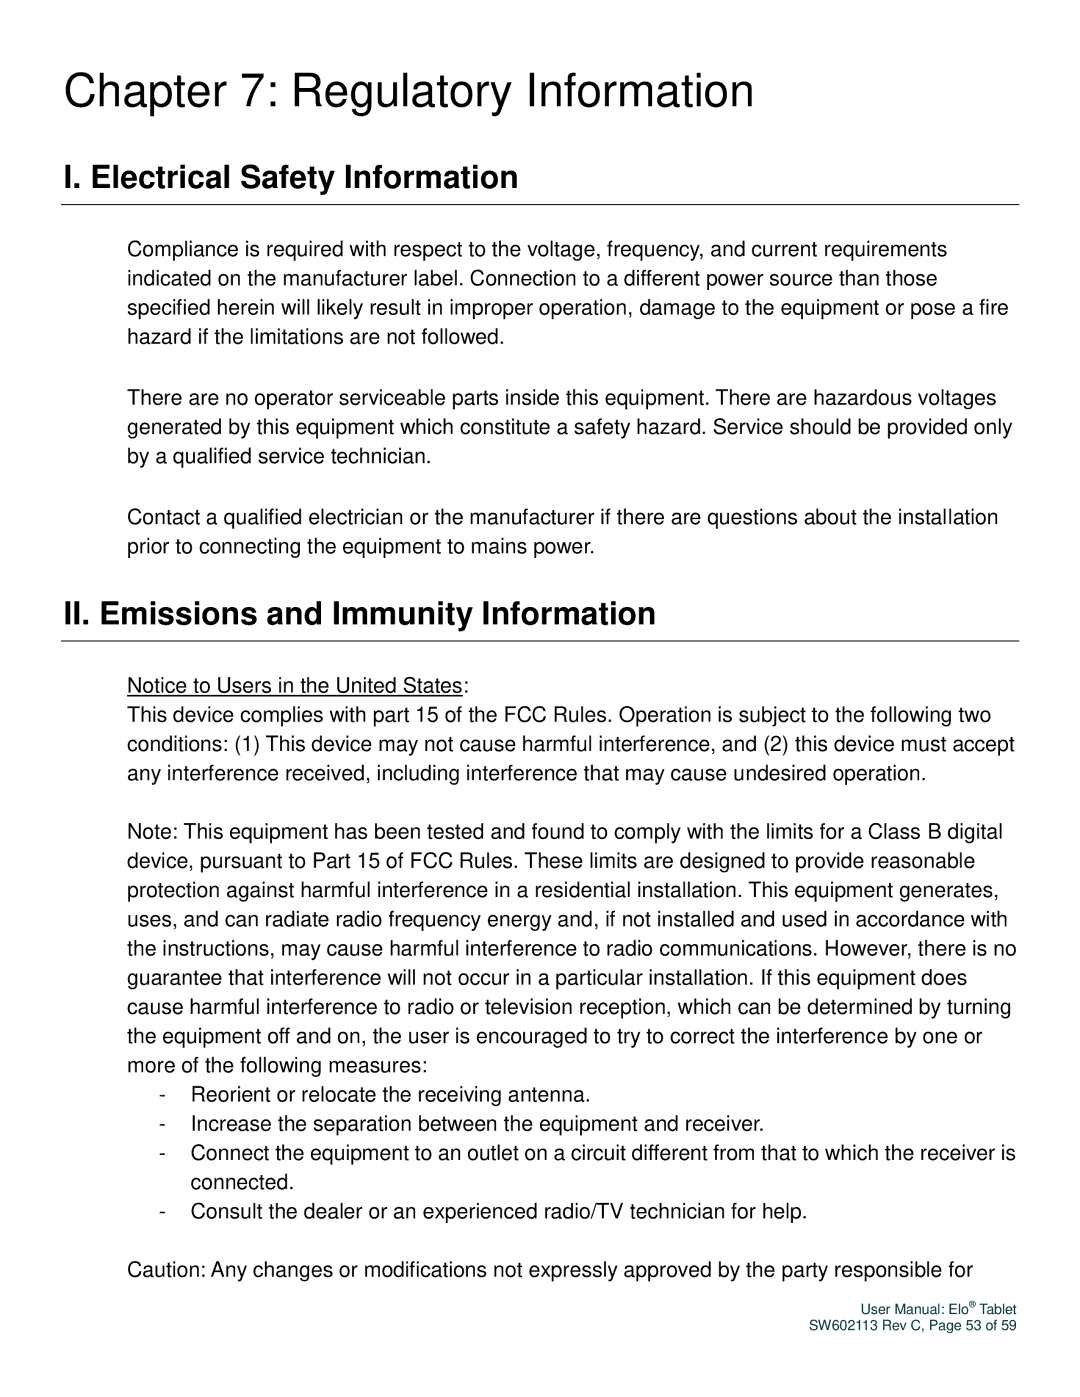 Elo TouchSystems SW602113 Regulatory Information, Electrical Safety Information, II. Emissions and Immunity Information 